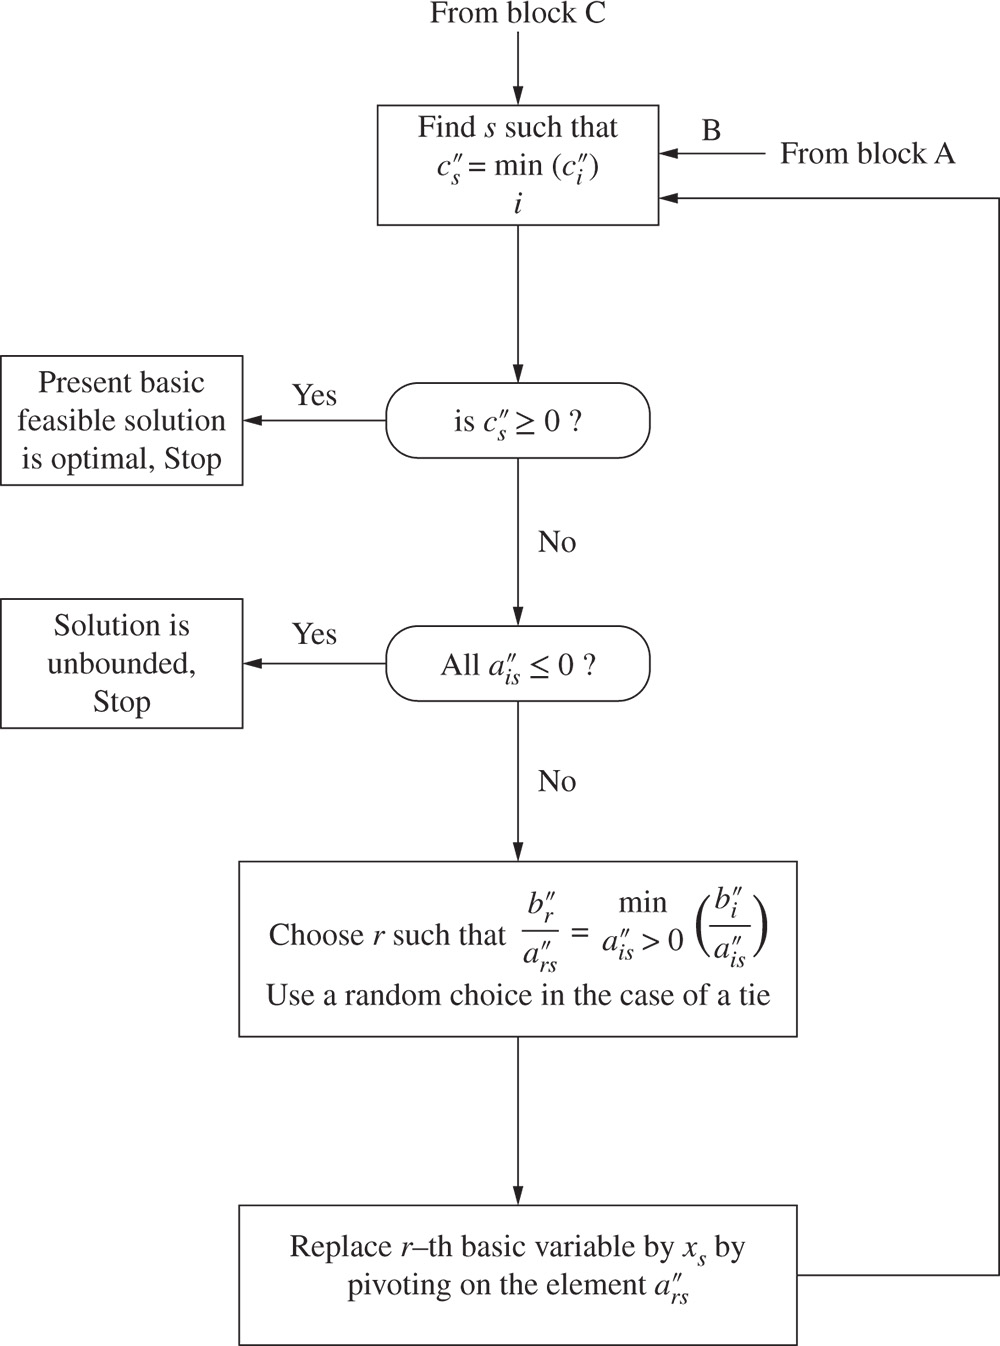 Flowchart that depicts the two-phase simplex method in block A.